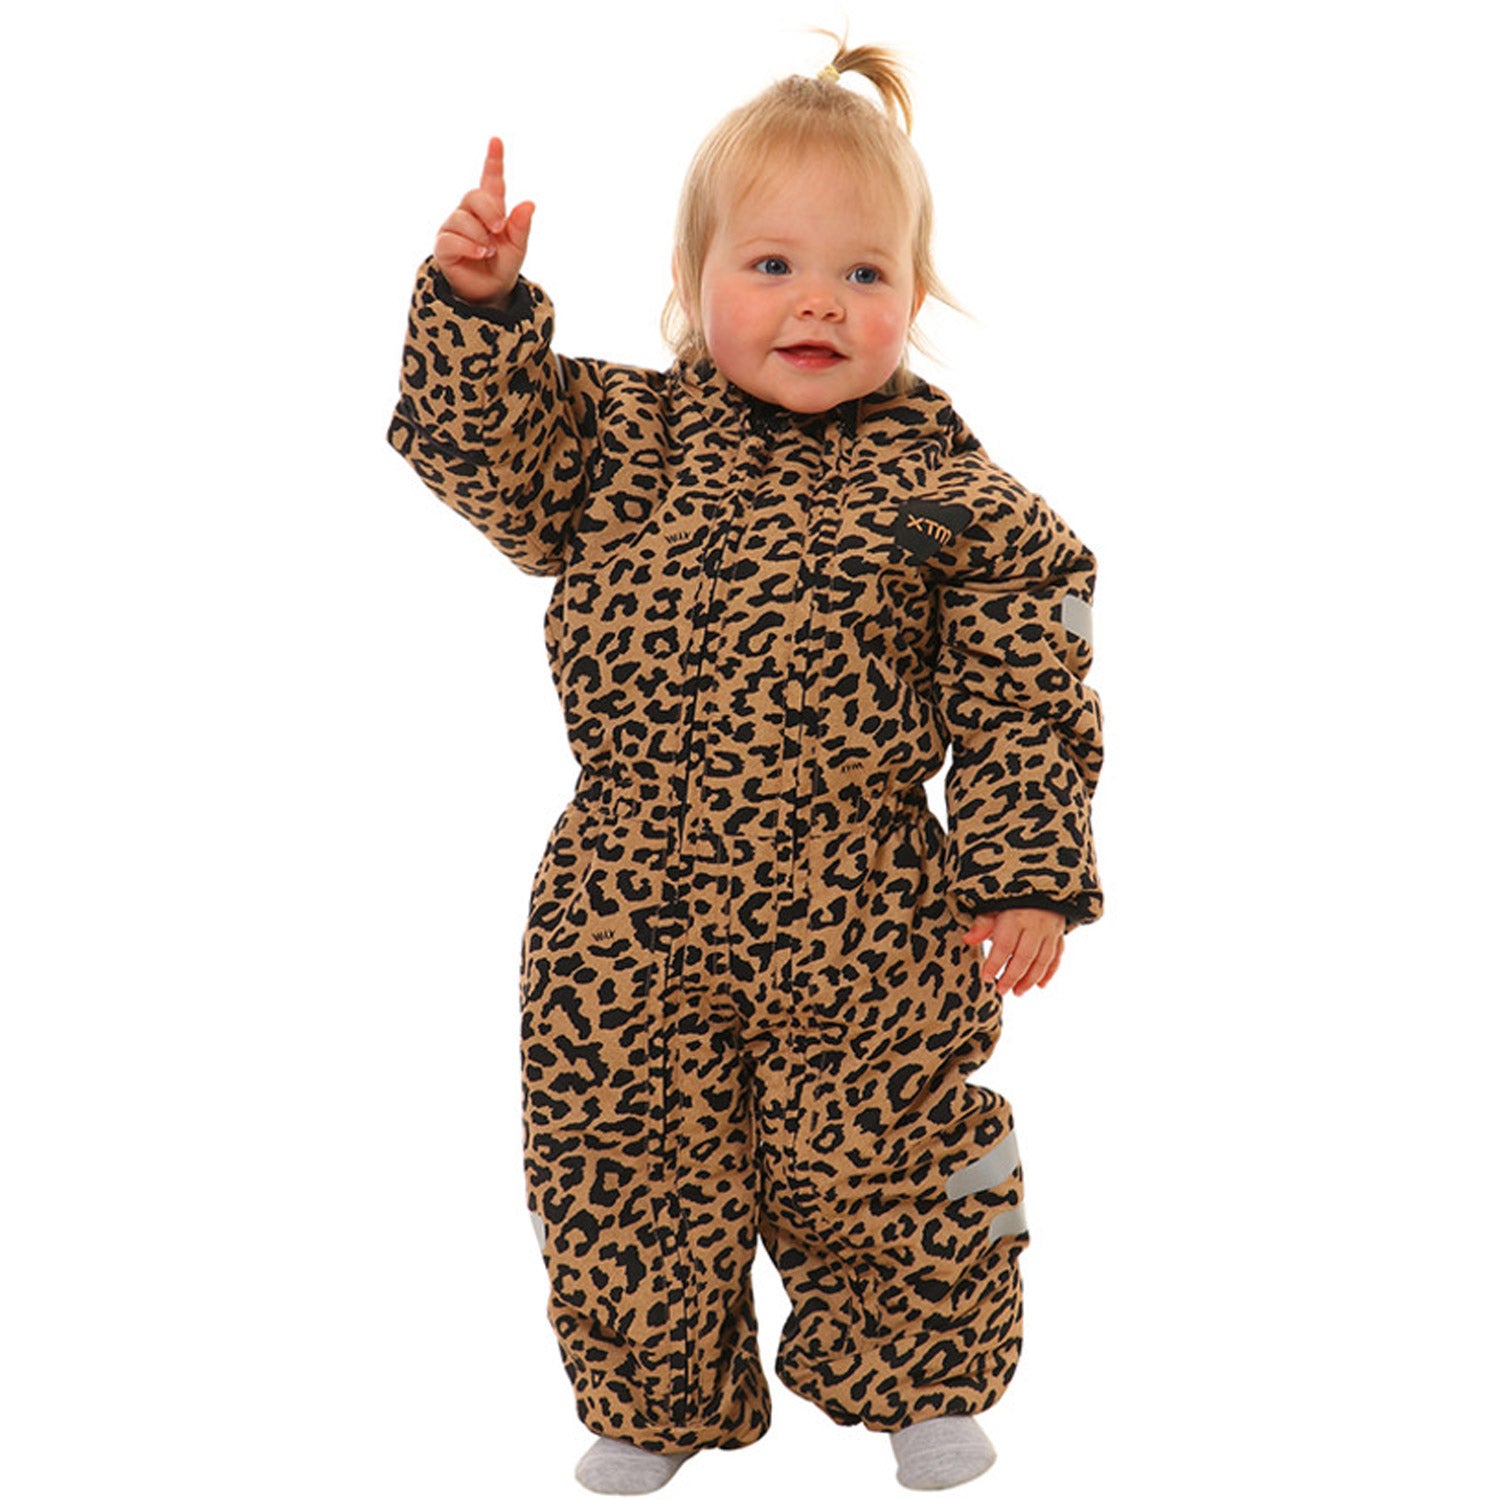 Papoose II One-Piece Infant Snow Suit